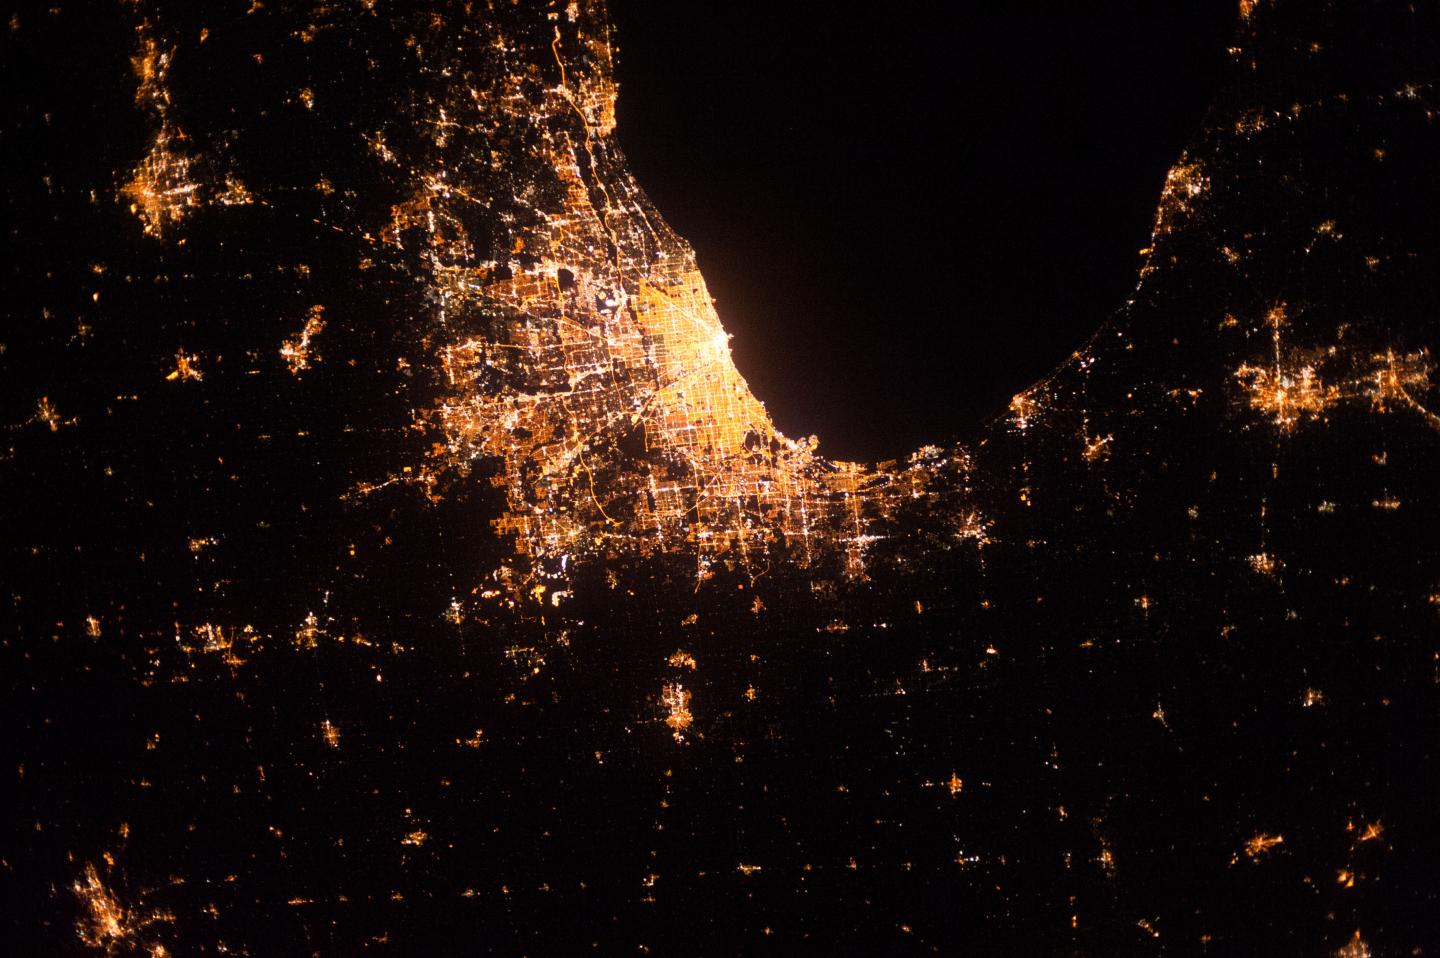 Night View of Chicago